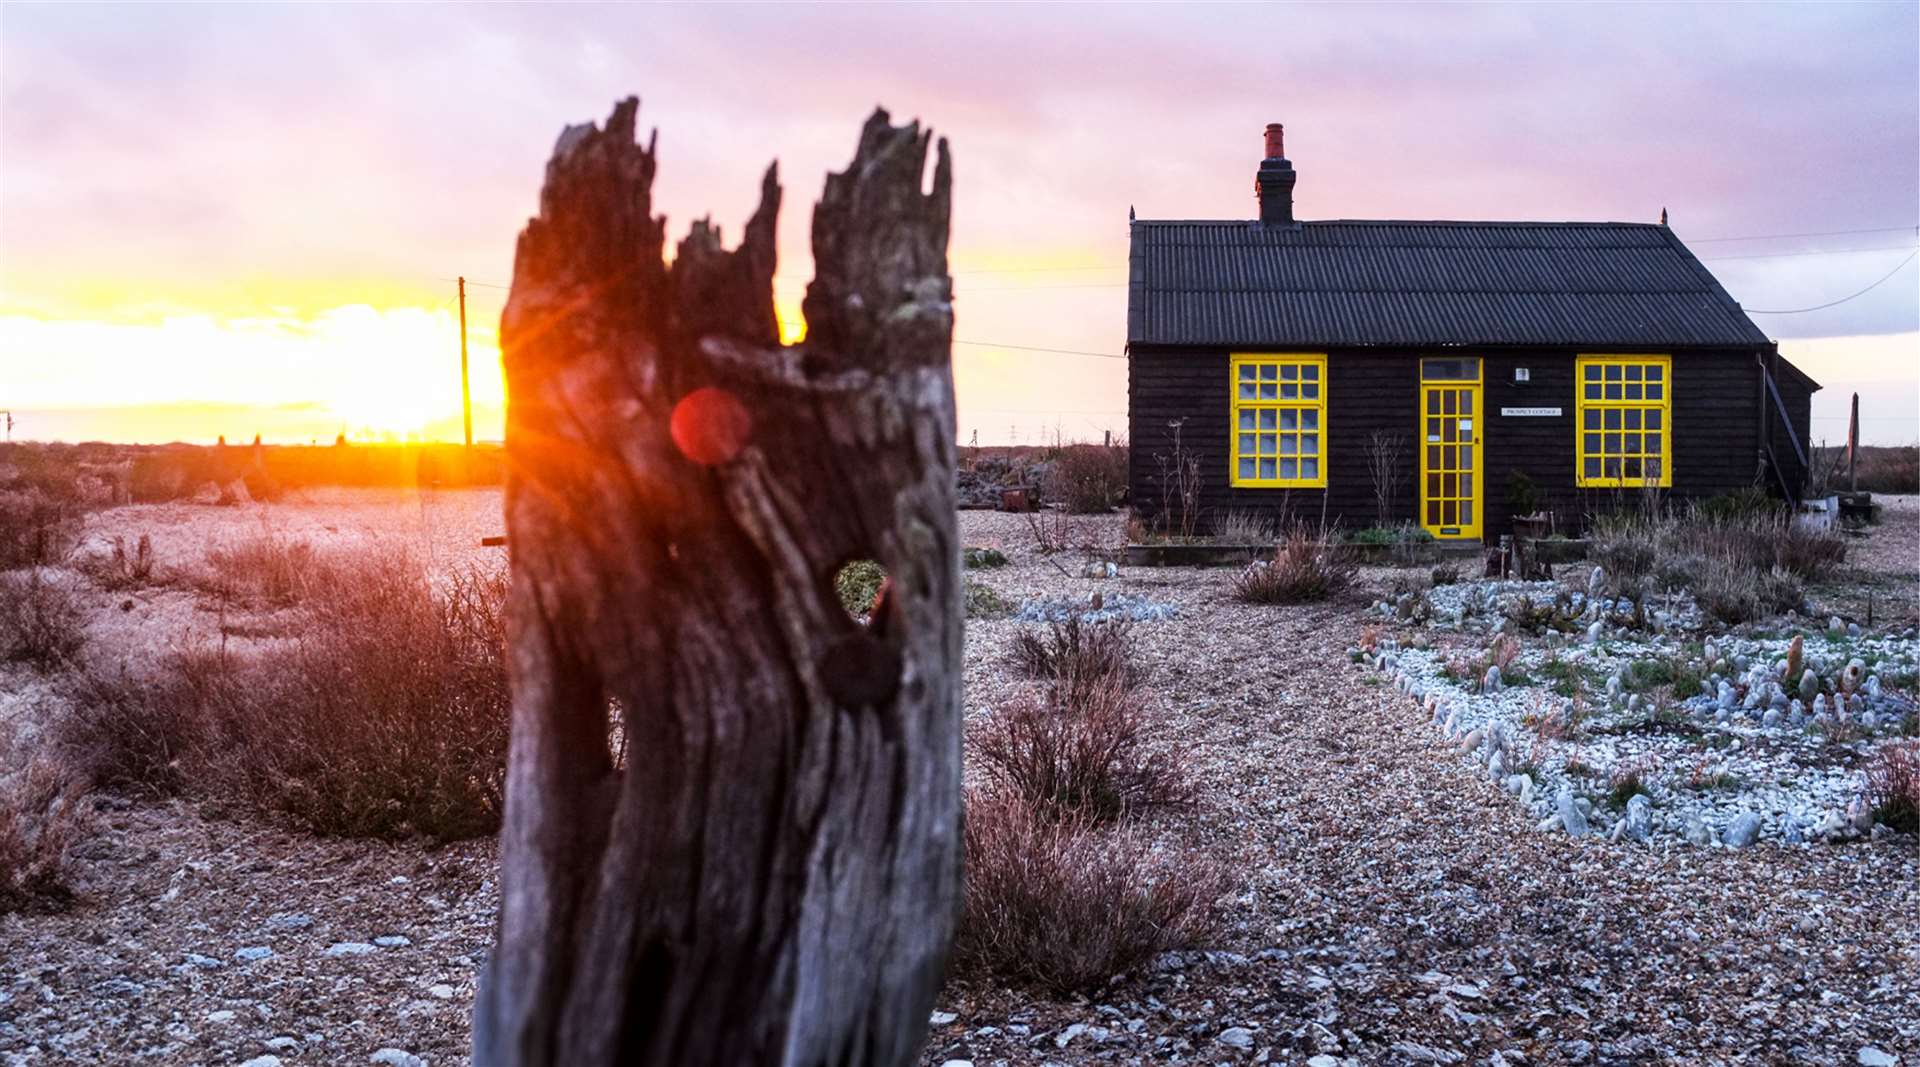 Derek Jarman's former home, Prospect Cottage, will be open for a public visit during the festival. Picture: Mark C. O'Flaherty